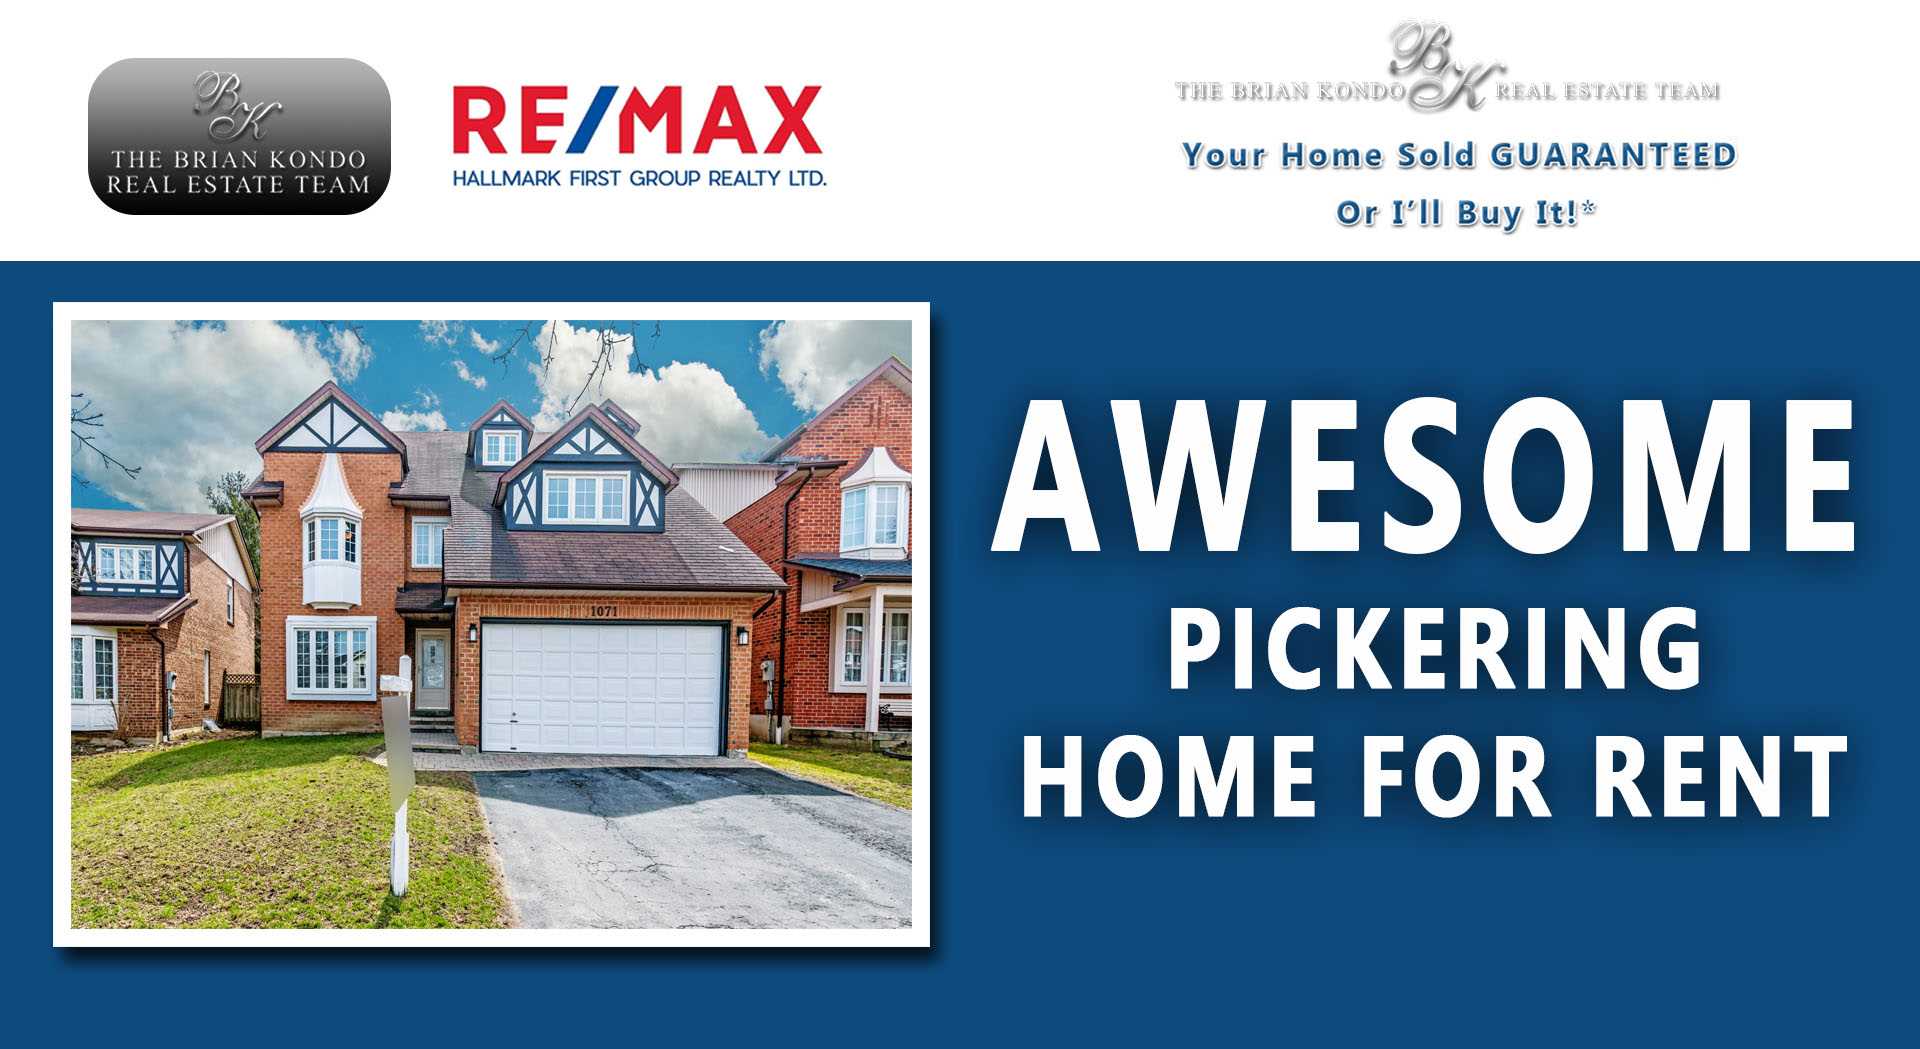 AWESOME PICKERING HOME FOR RENT | The Brian Kondo Real Estate Team